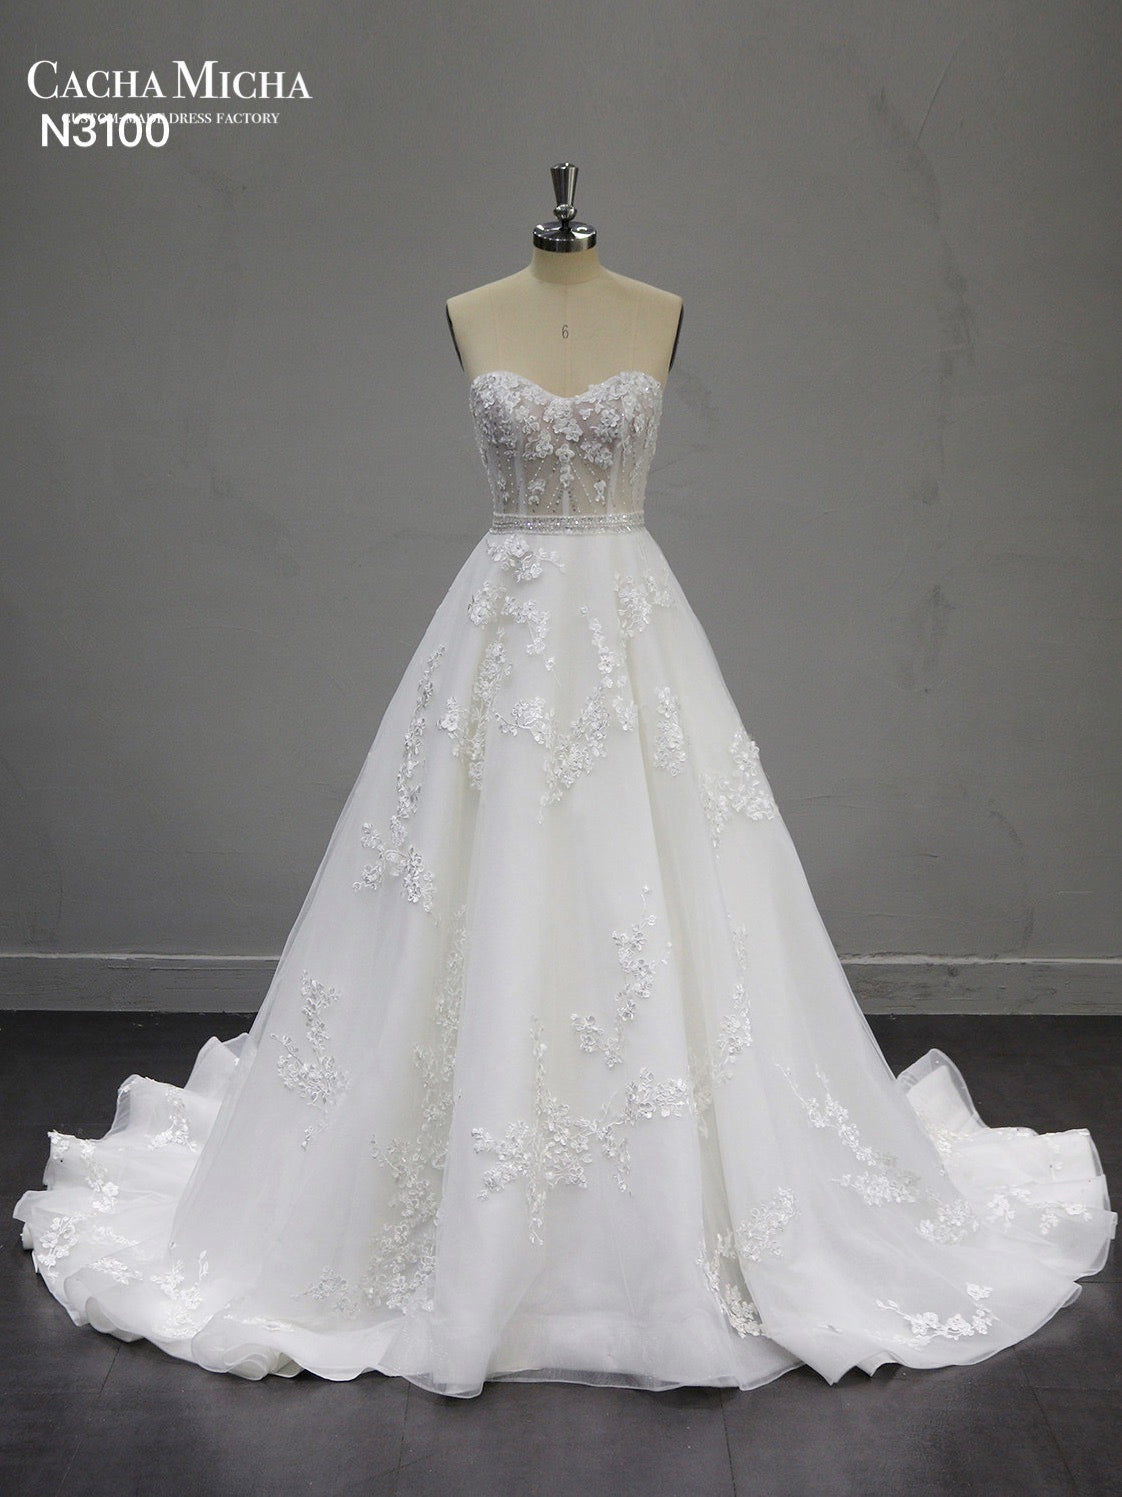 Hand Beaded Lace Ball Gown Wedding Dress N3100